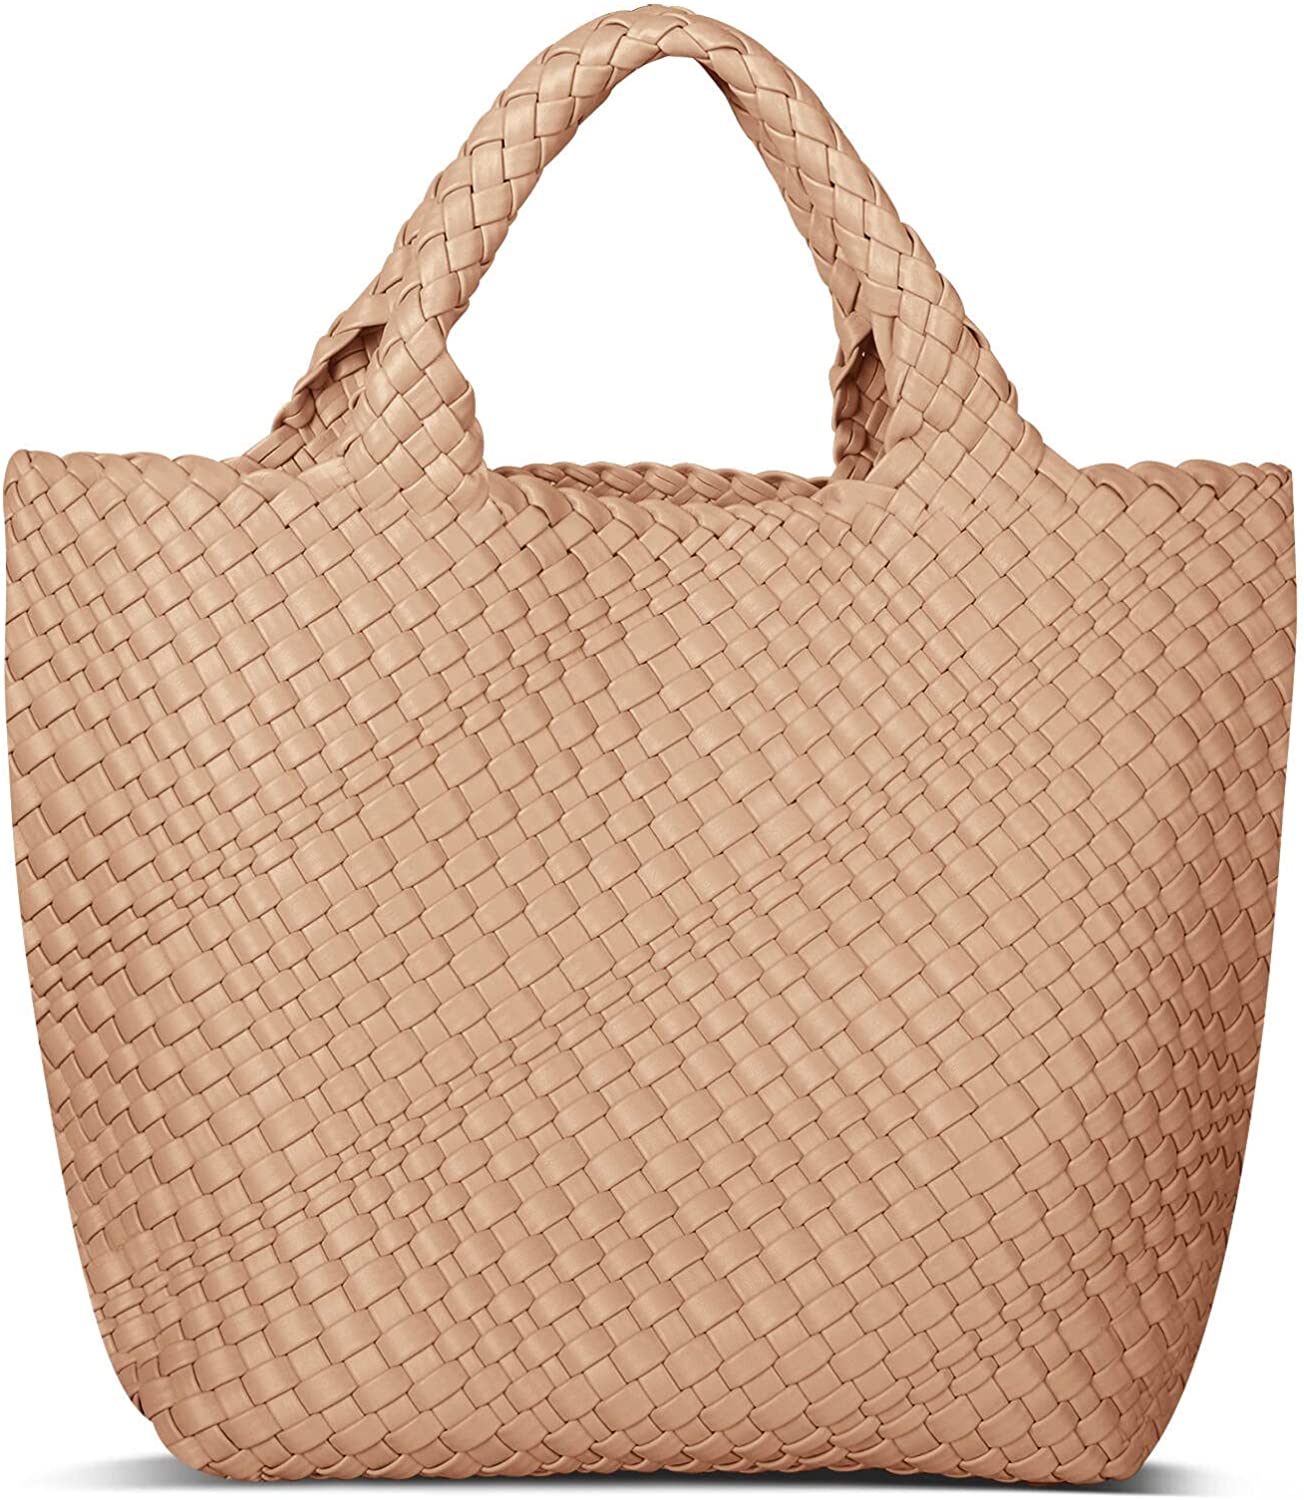 Vegan Leather Woven Tote Bag with Wallet Australia